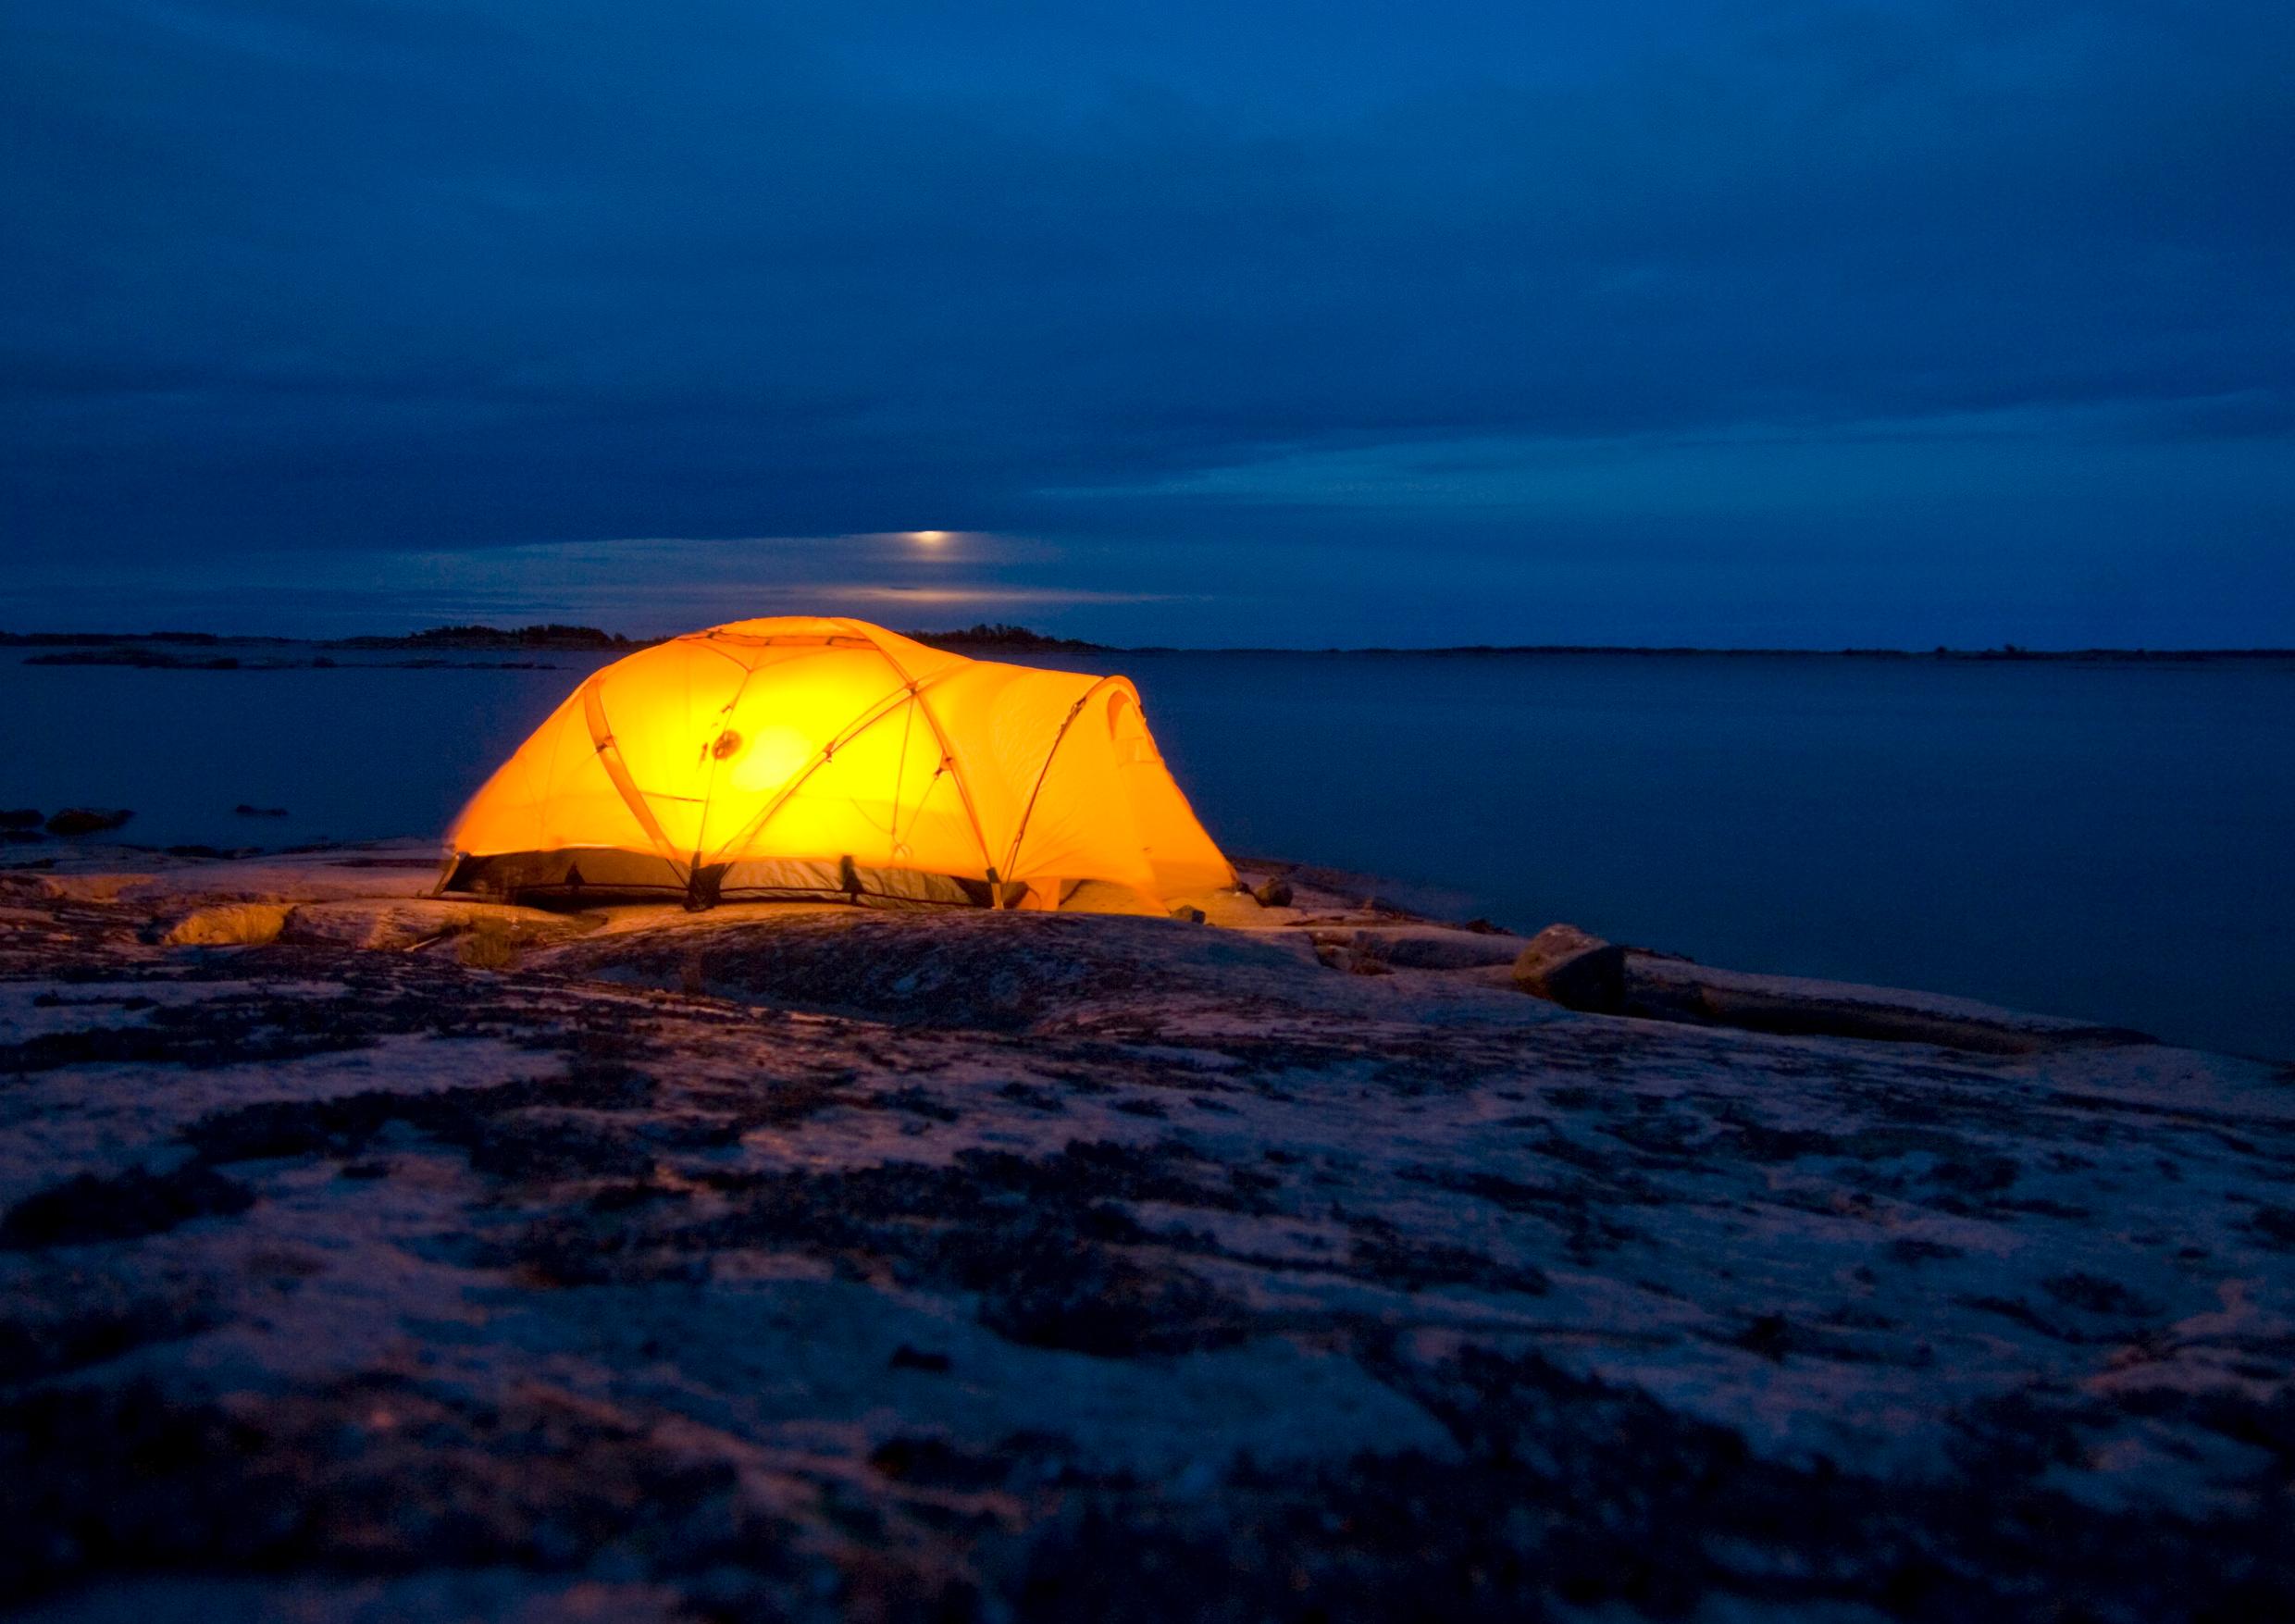 At night, a tent raised on a cliff overlooking water is lit up from inside.